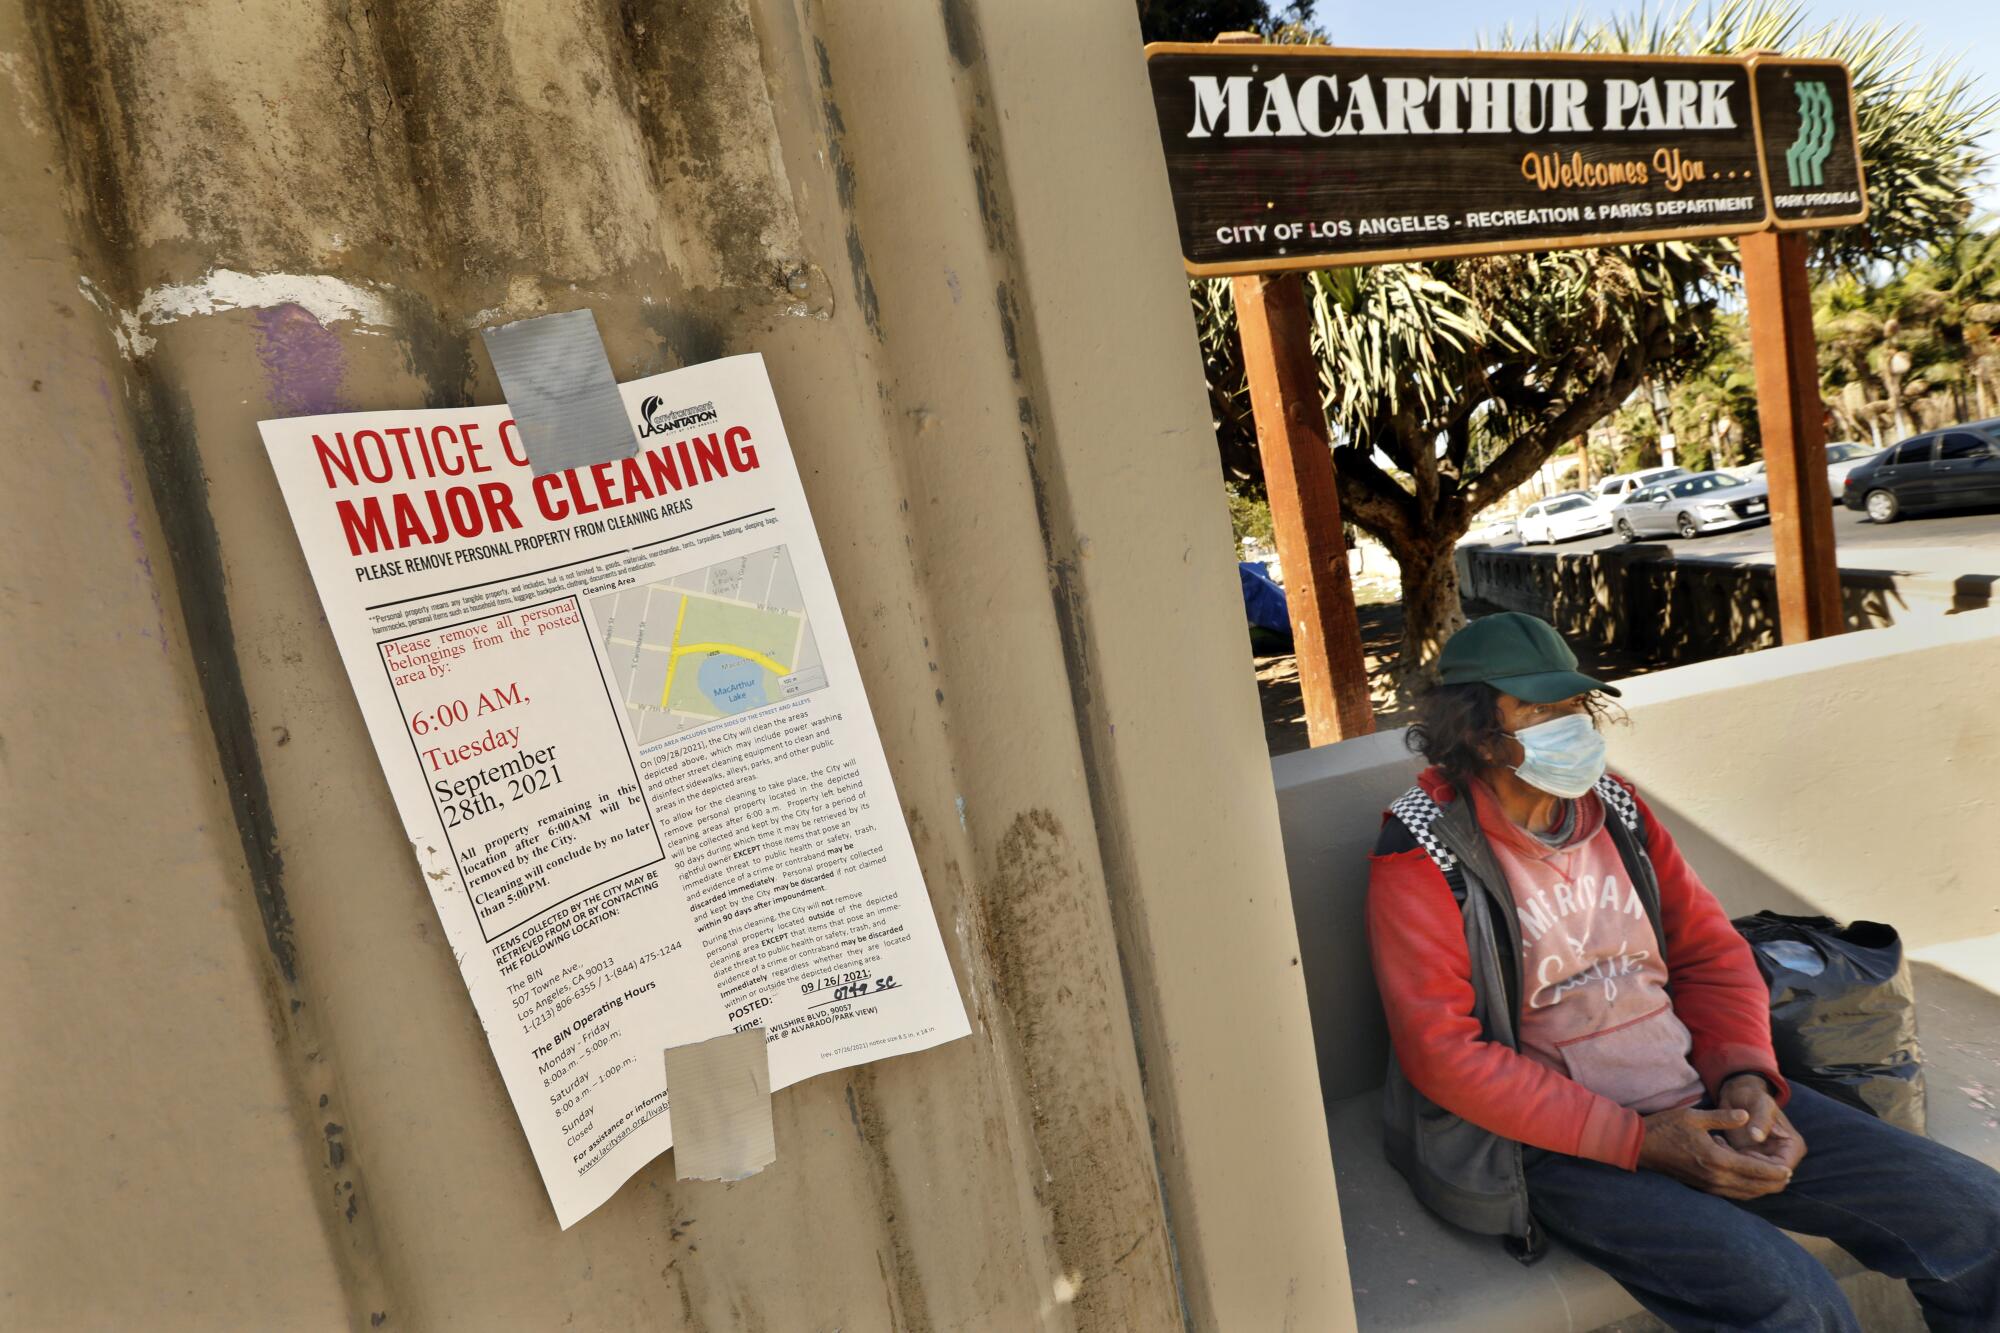 A masked person sits at MacArthur Park